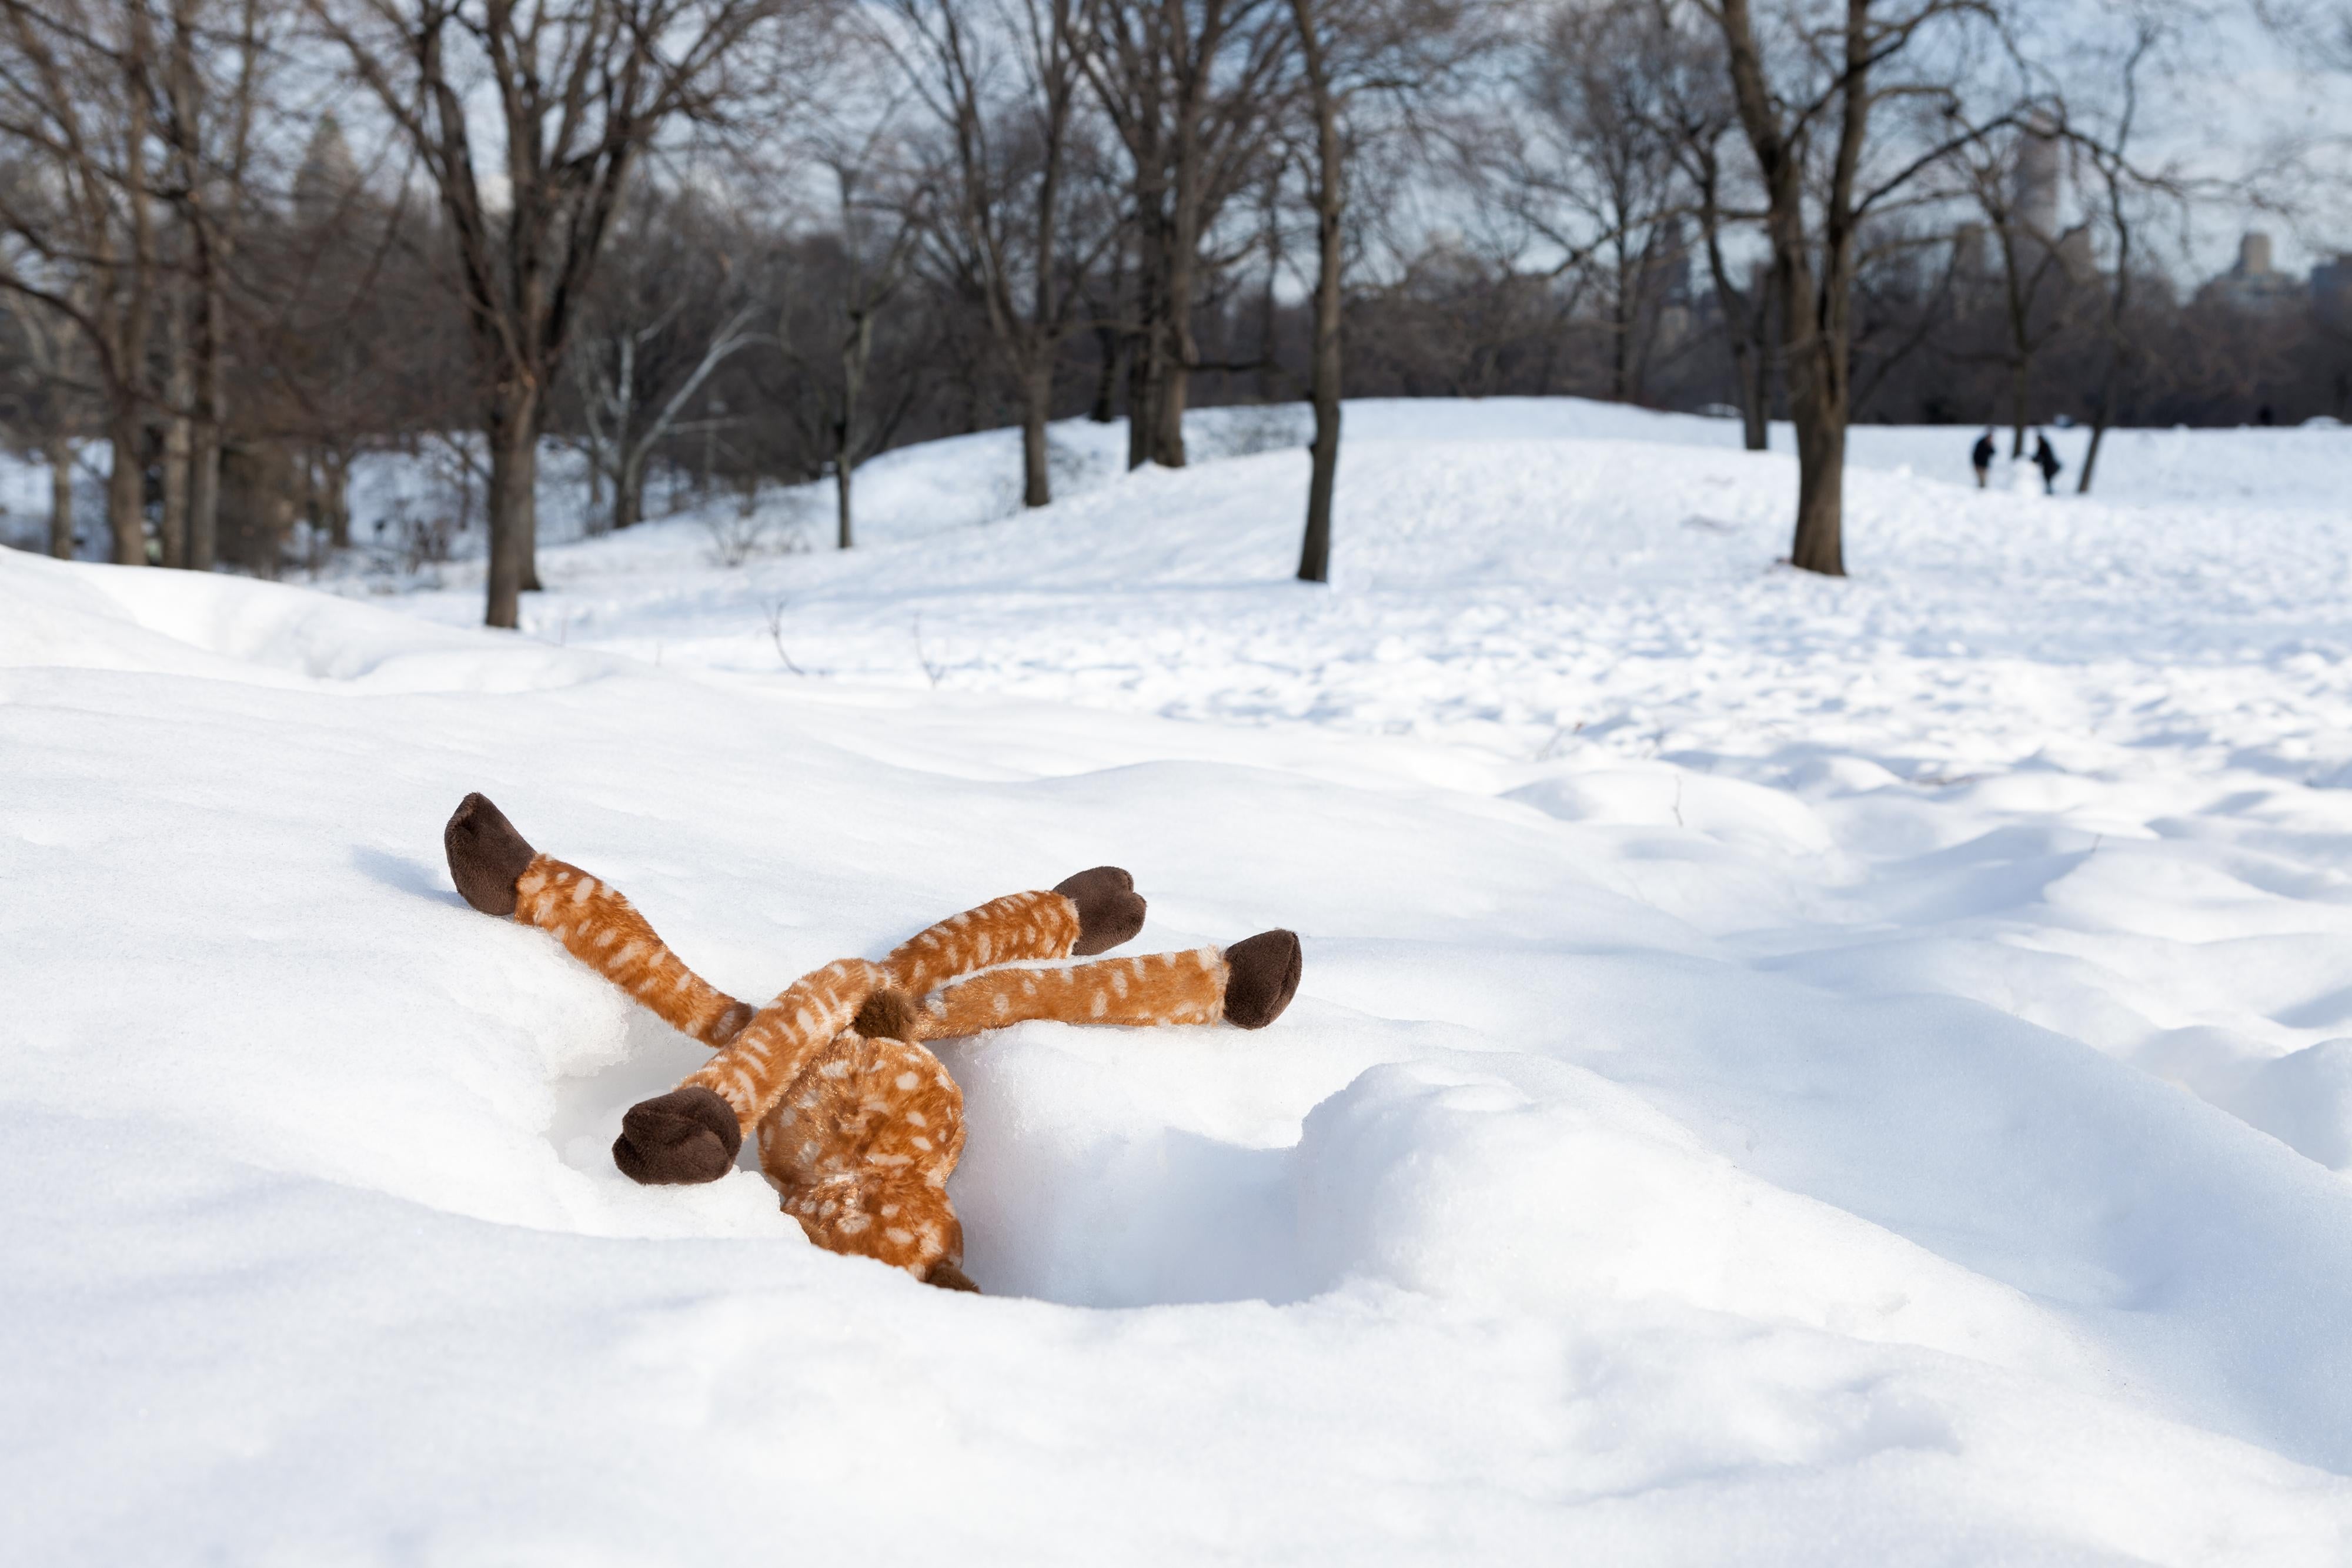 Jeanette May Color Photograph - “Morbidity & Mortality: Deer” Humorous Photograph of a Dog Toy in the Snow